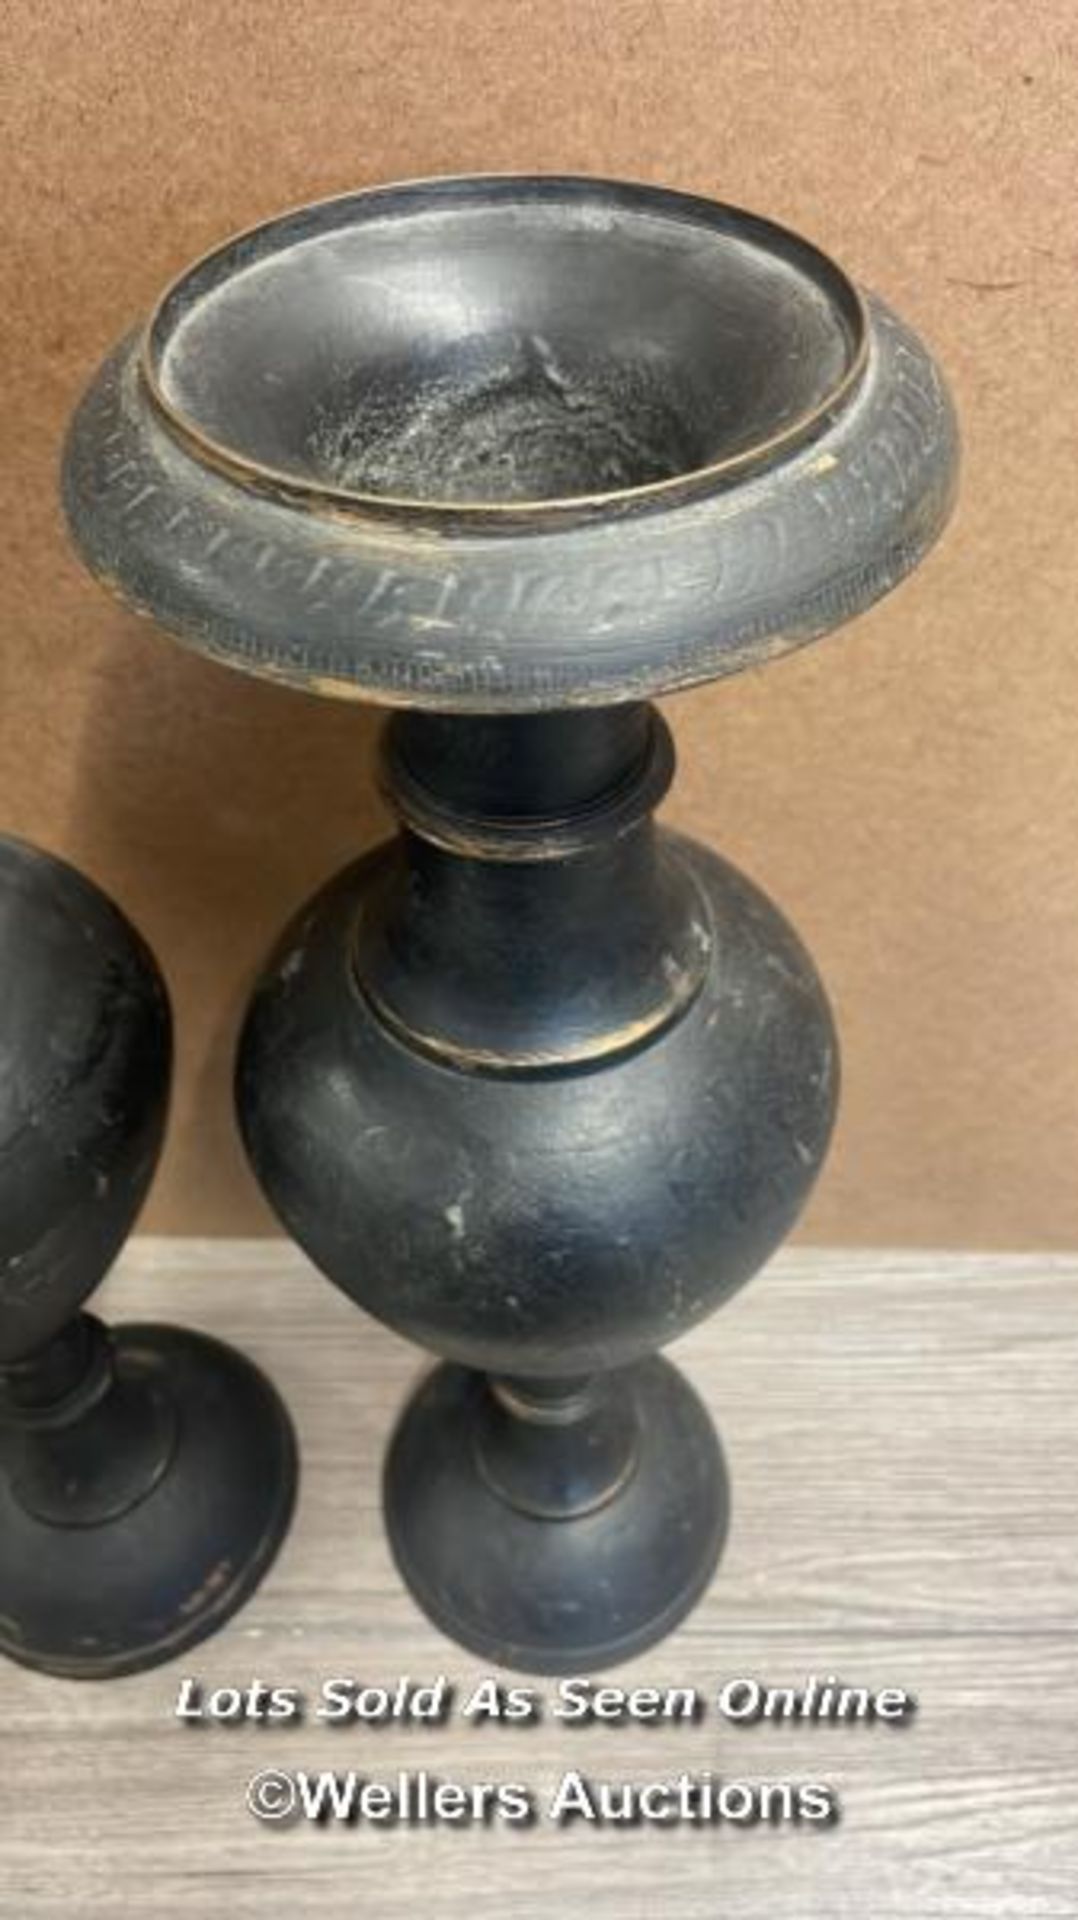 PAIR OF LARGE BRASS CANDLE HOLDERS PAINTED BLACK (PAINT NEEDS TO BE REMOVED), 50CM HIGH - Image 3 of 6